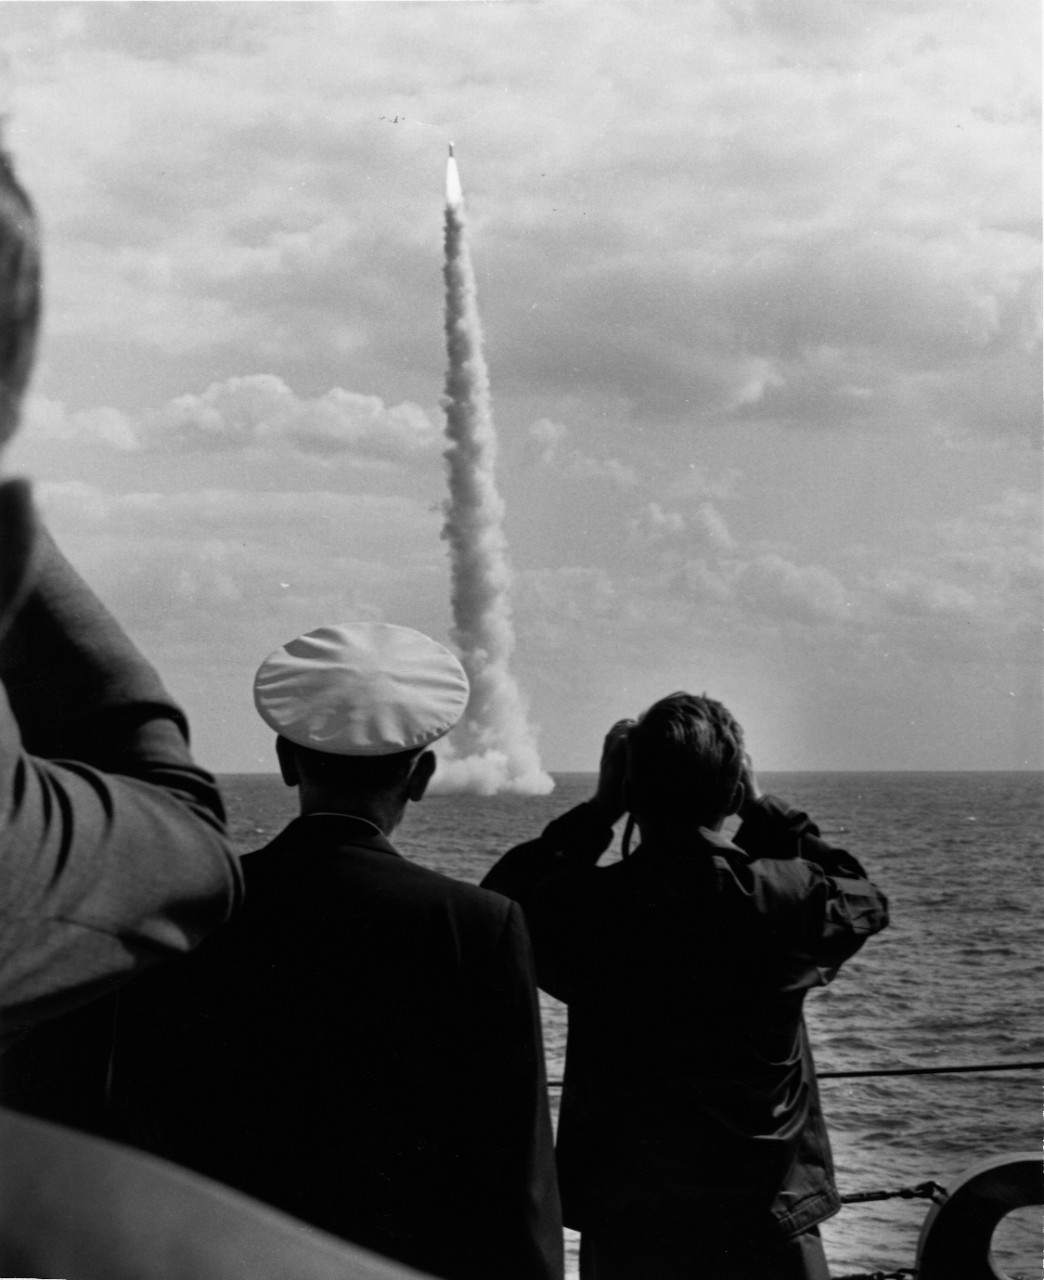 <p>L55-15.02.07 Polaris Missile Launch from USS Andrew Jackson (SSBN-619) viewed by President Kennedy on Board the USS Observation Island (AG-154)</p>
